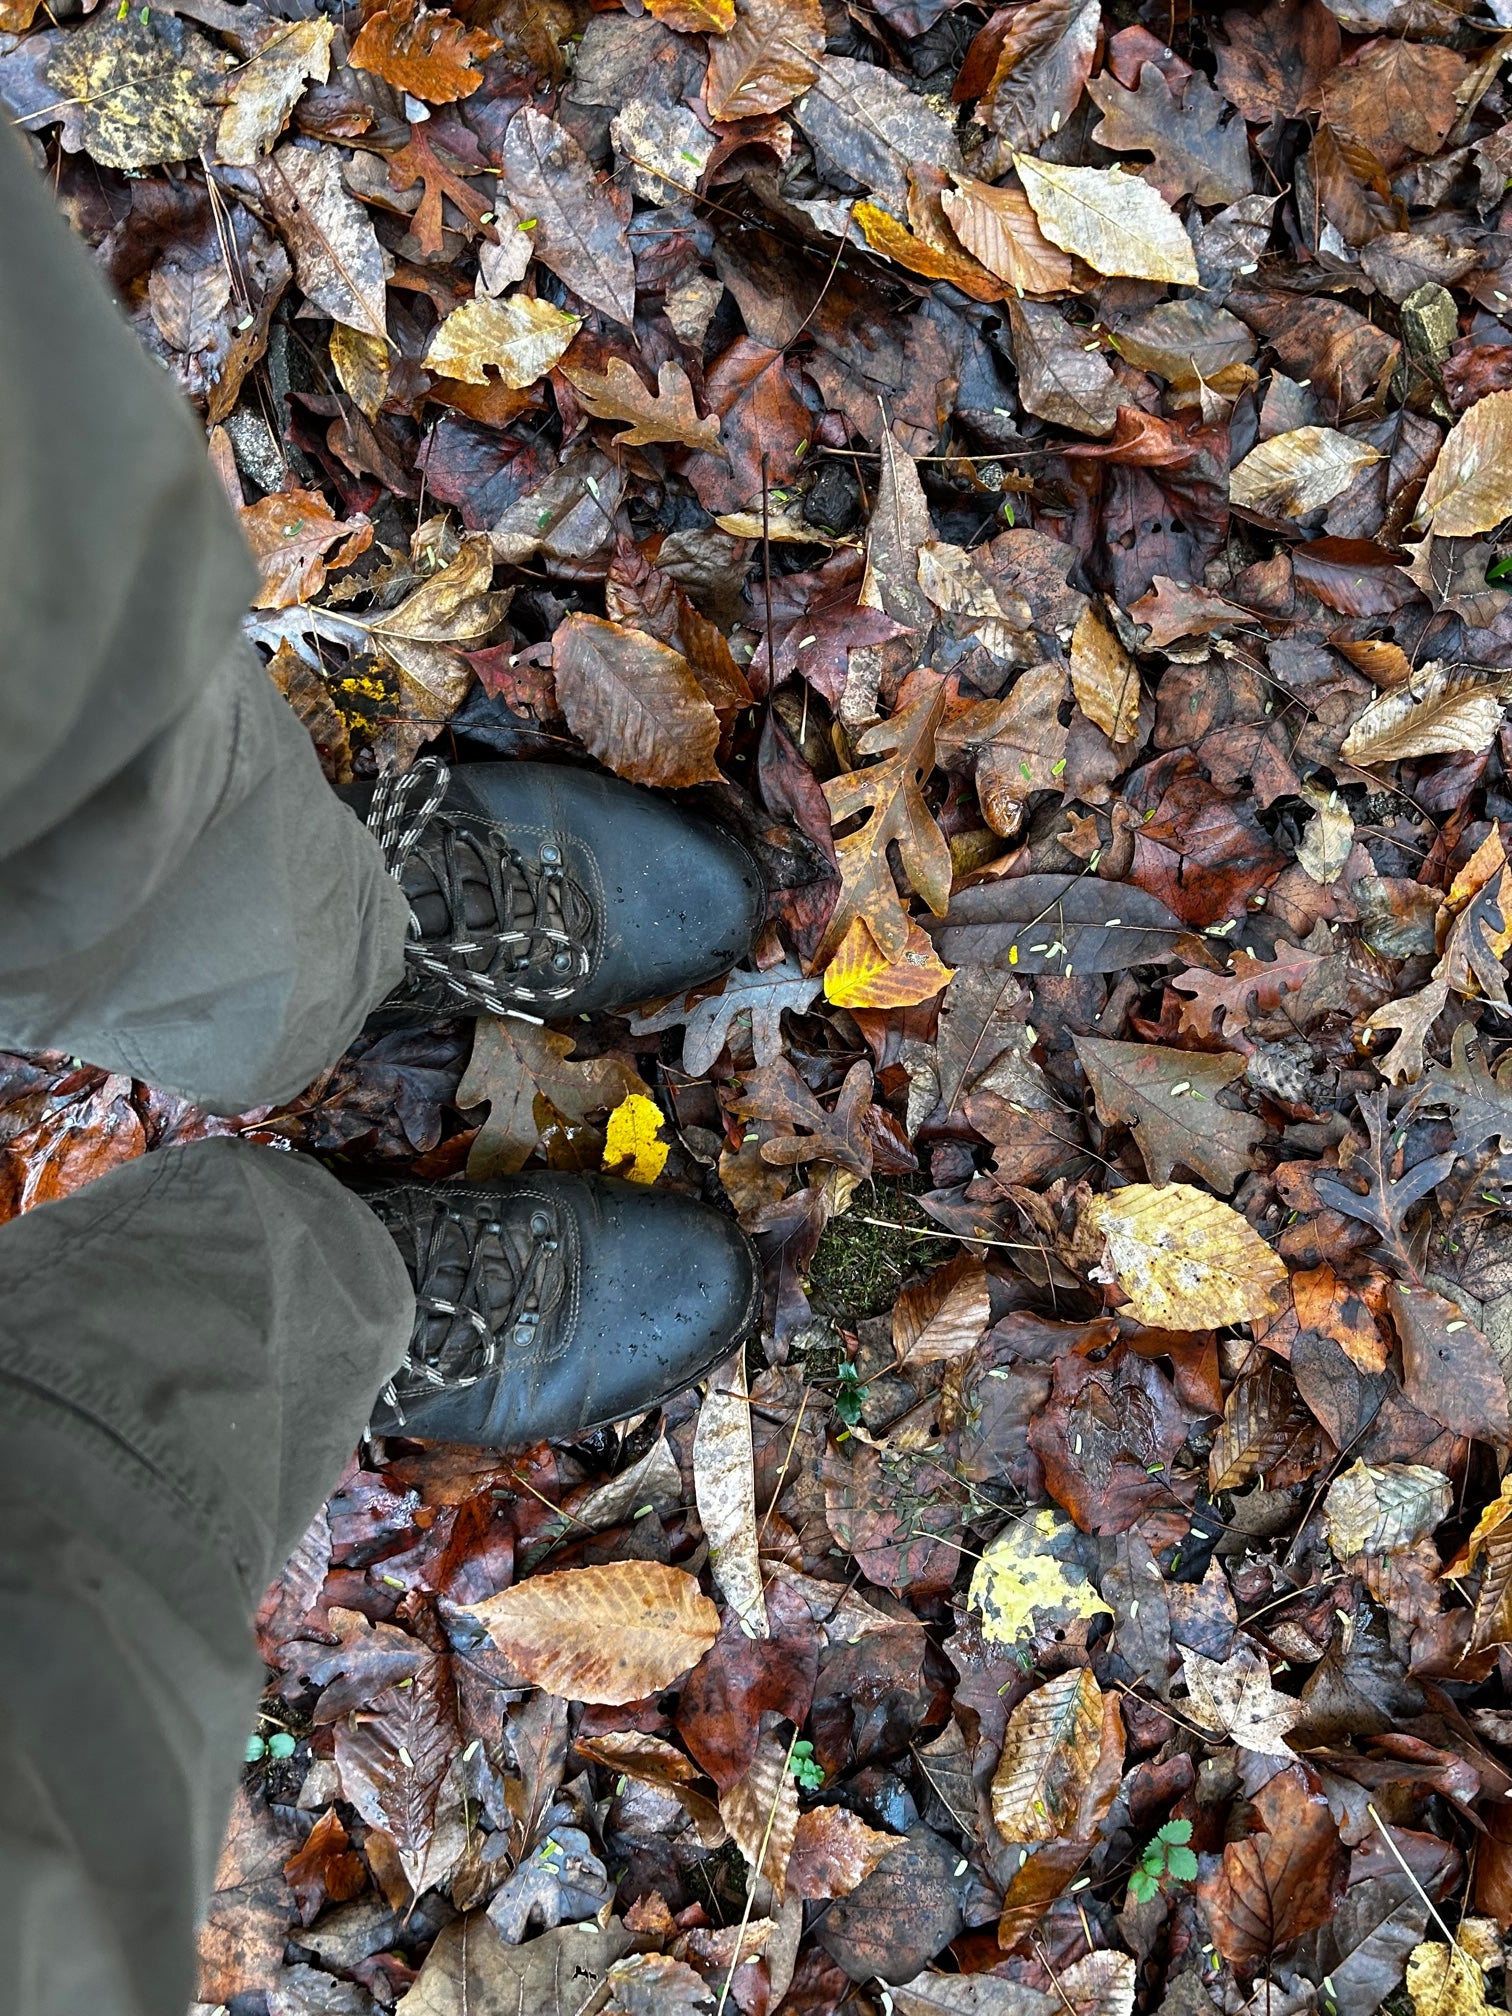 Limmer Lightweight Looking Down at Feet Boots In Leaves Jim From Atlanta